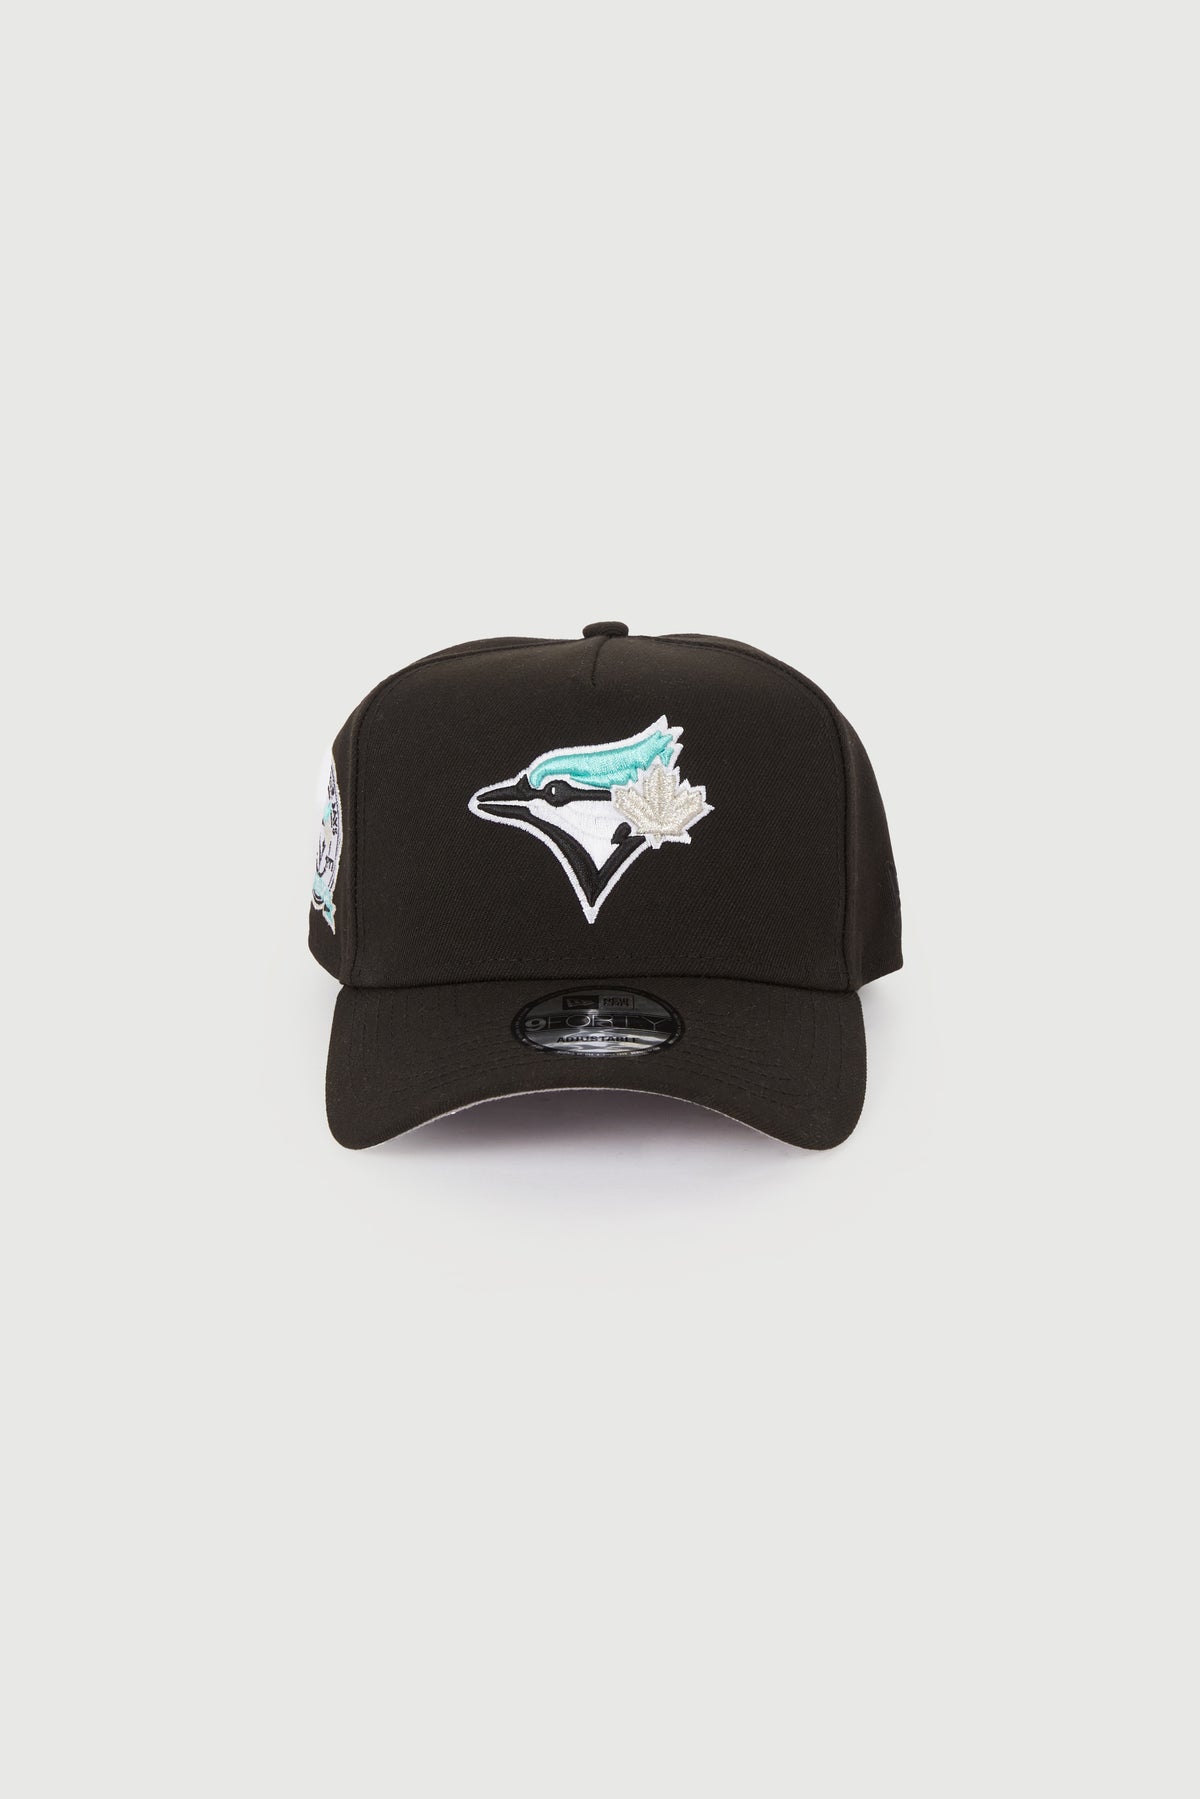 Toronto Blue Jays 40th Anniversary 9FORTY A-Frame Hat - Black/Gray